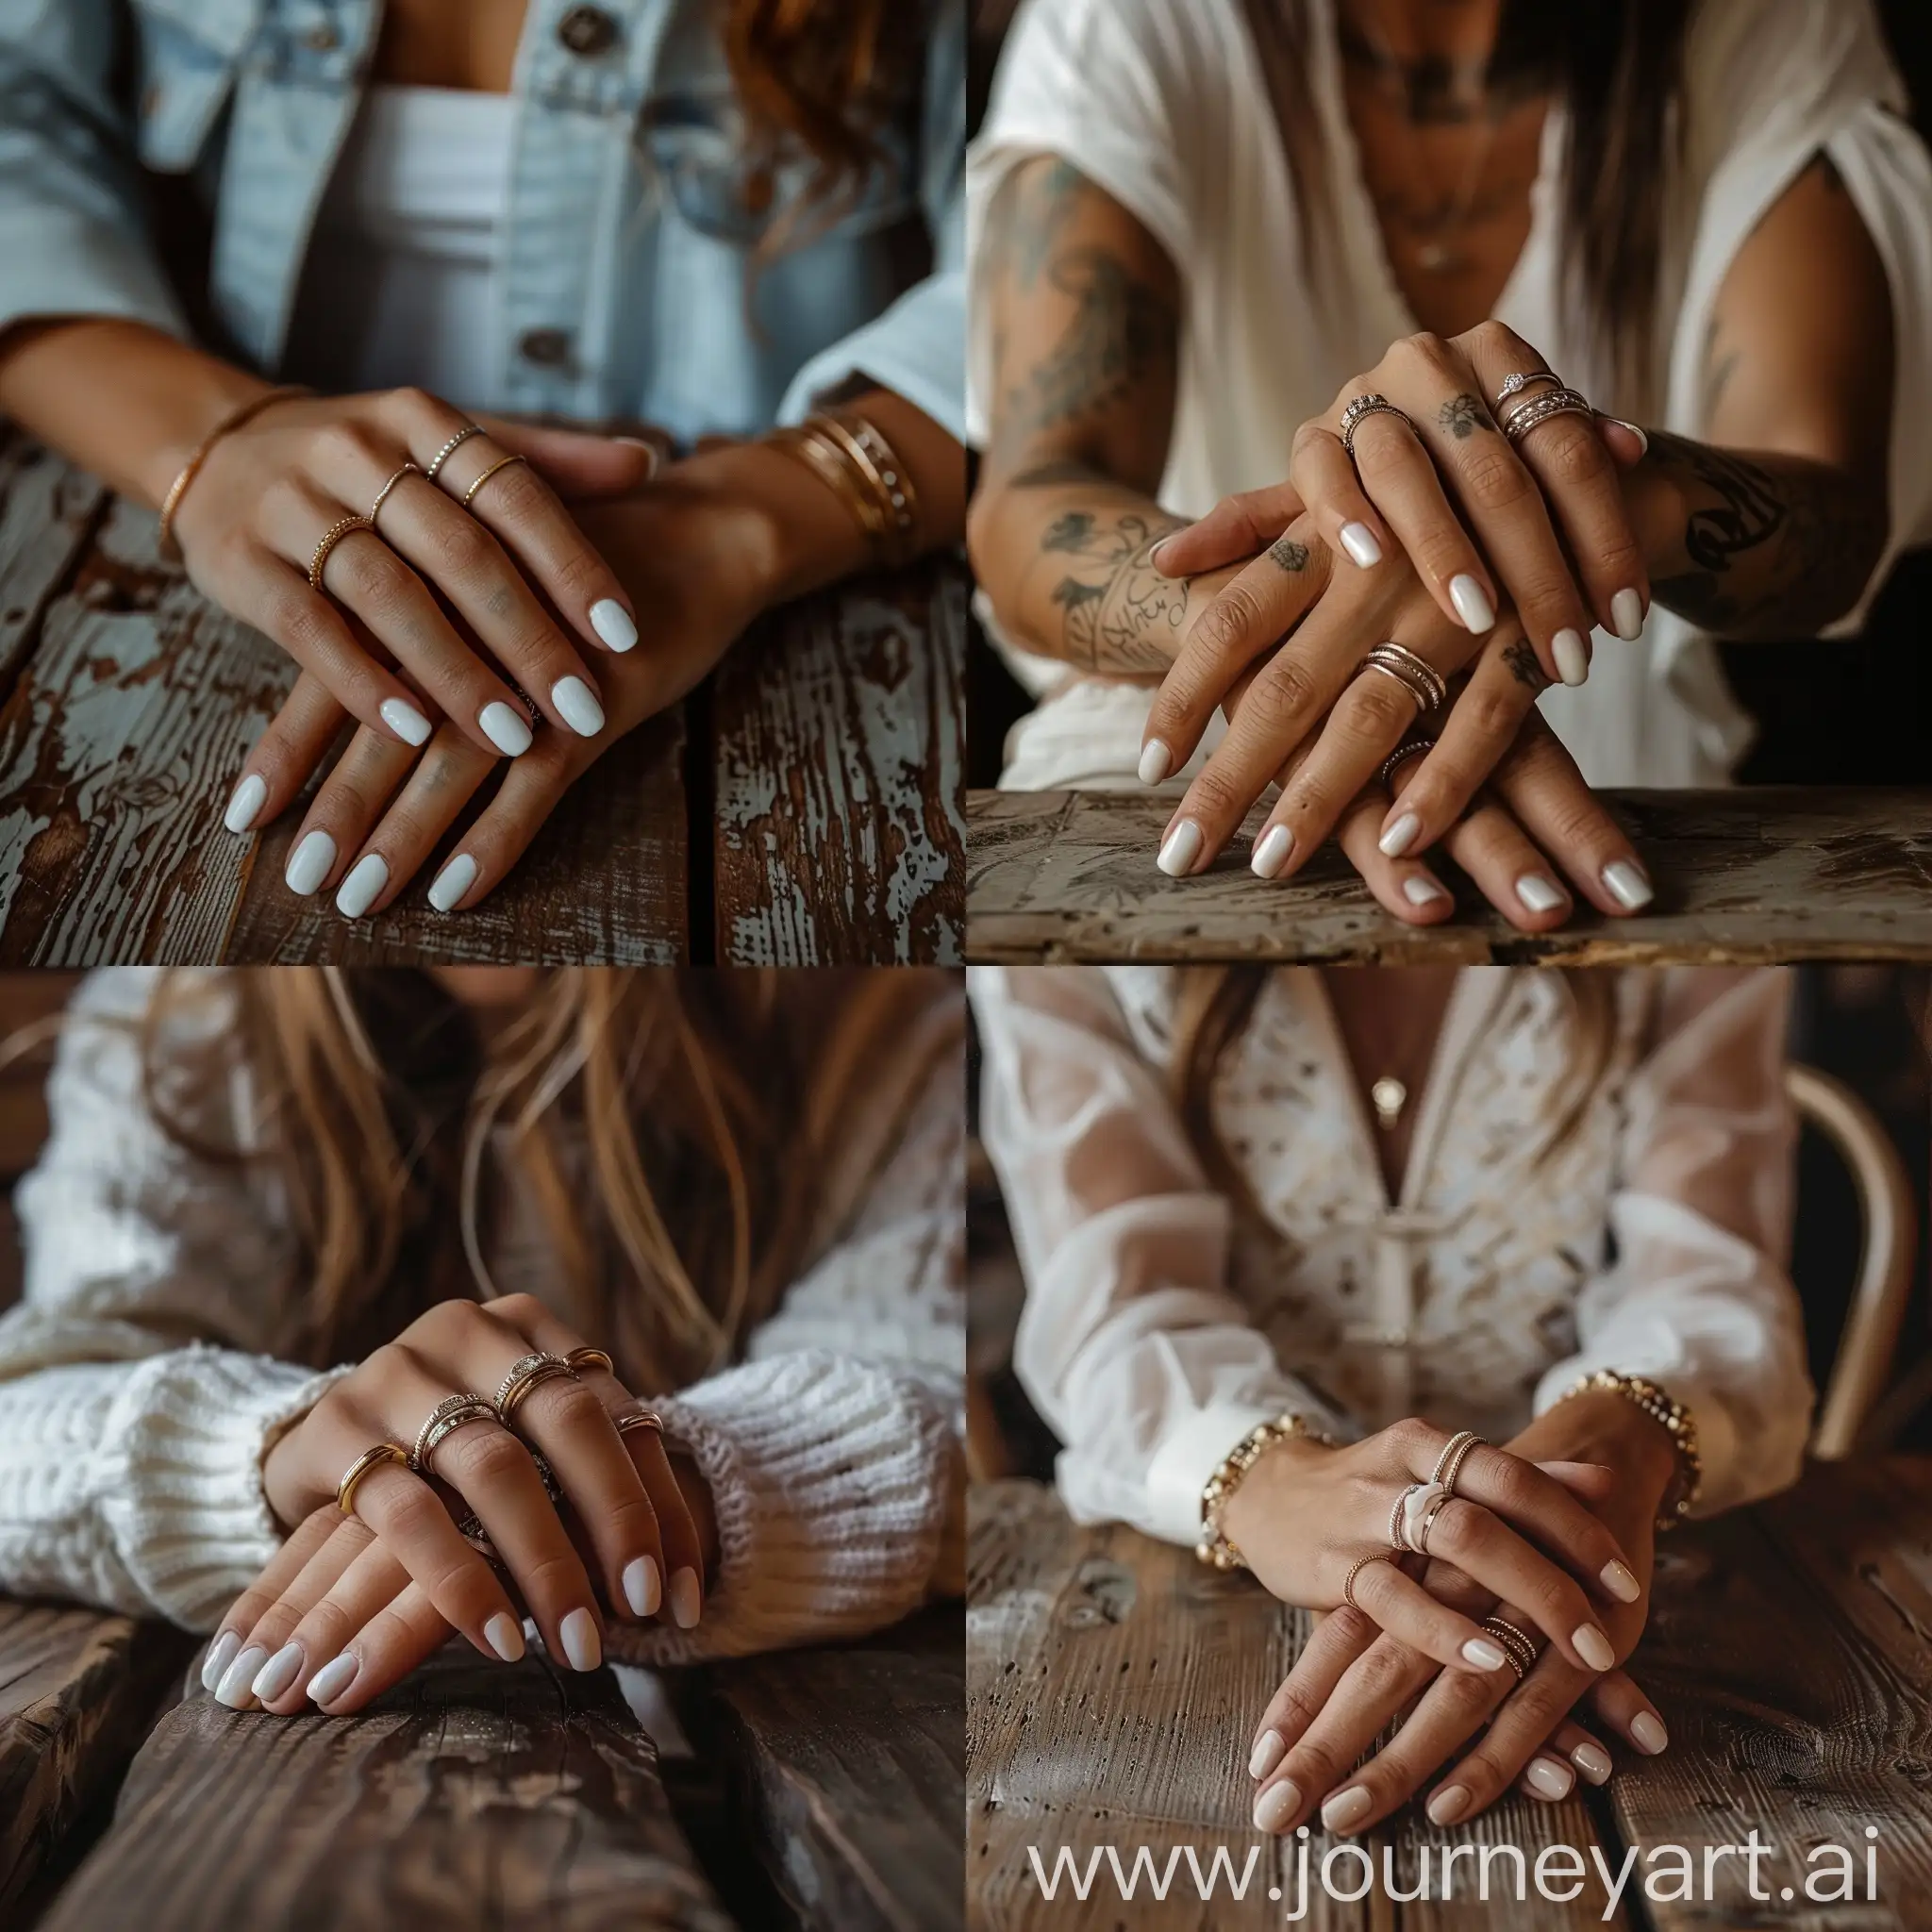 CloseUp-of-Elegant-Womens-Hands-with-White-Gel-Nail-Polish-and-Multiple-Rings